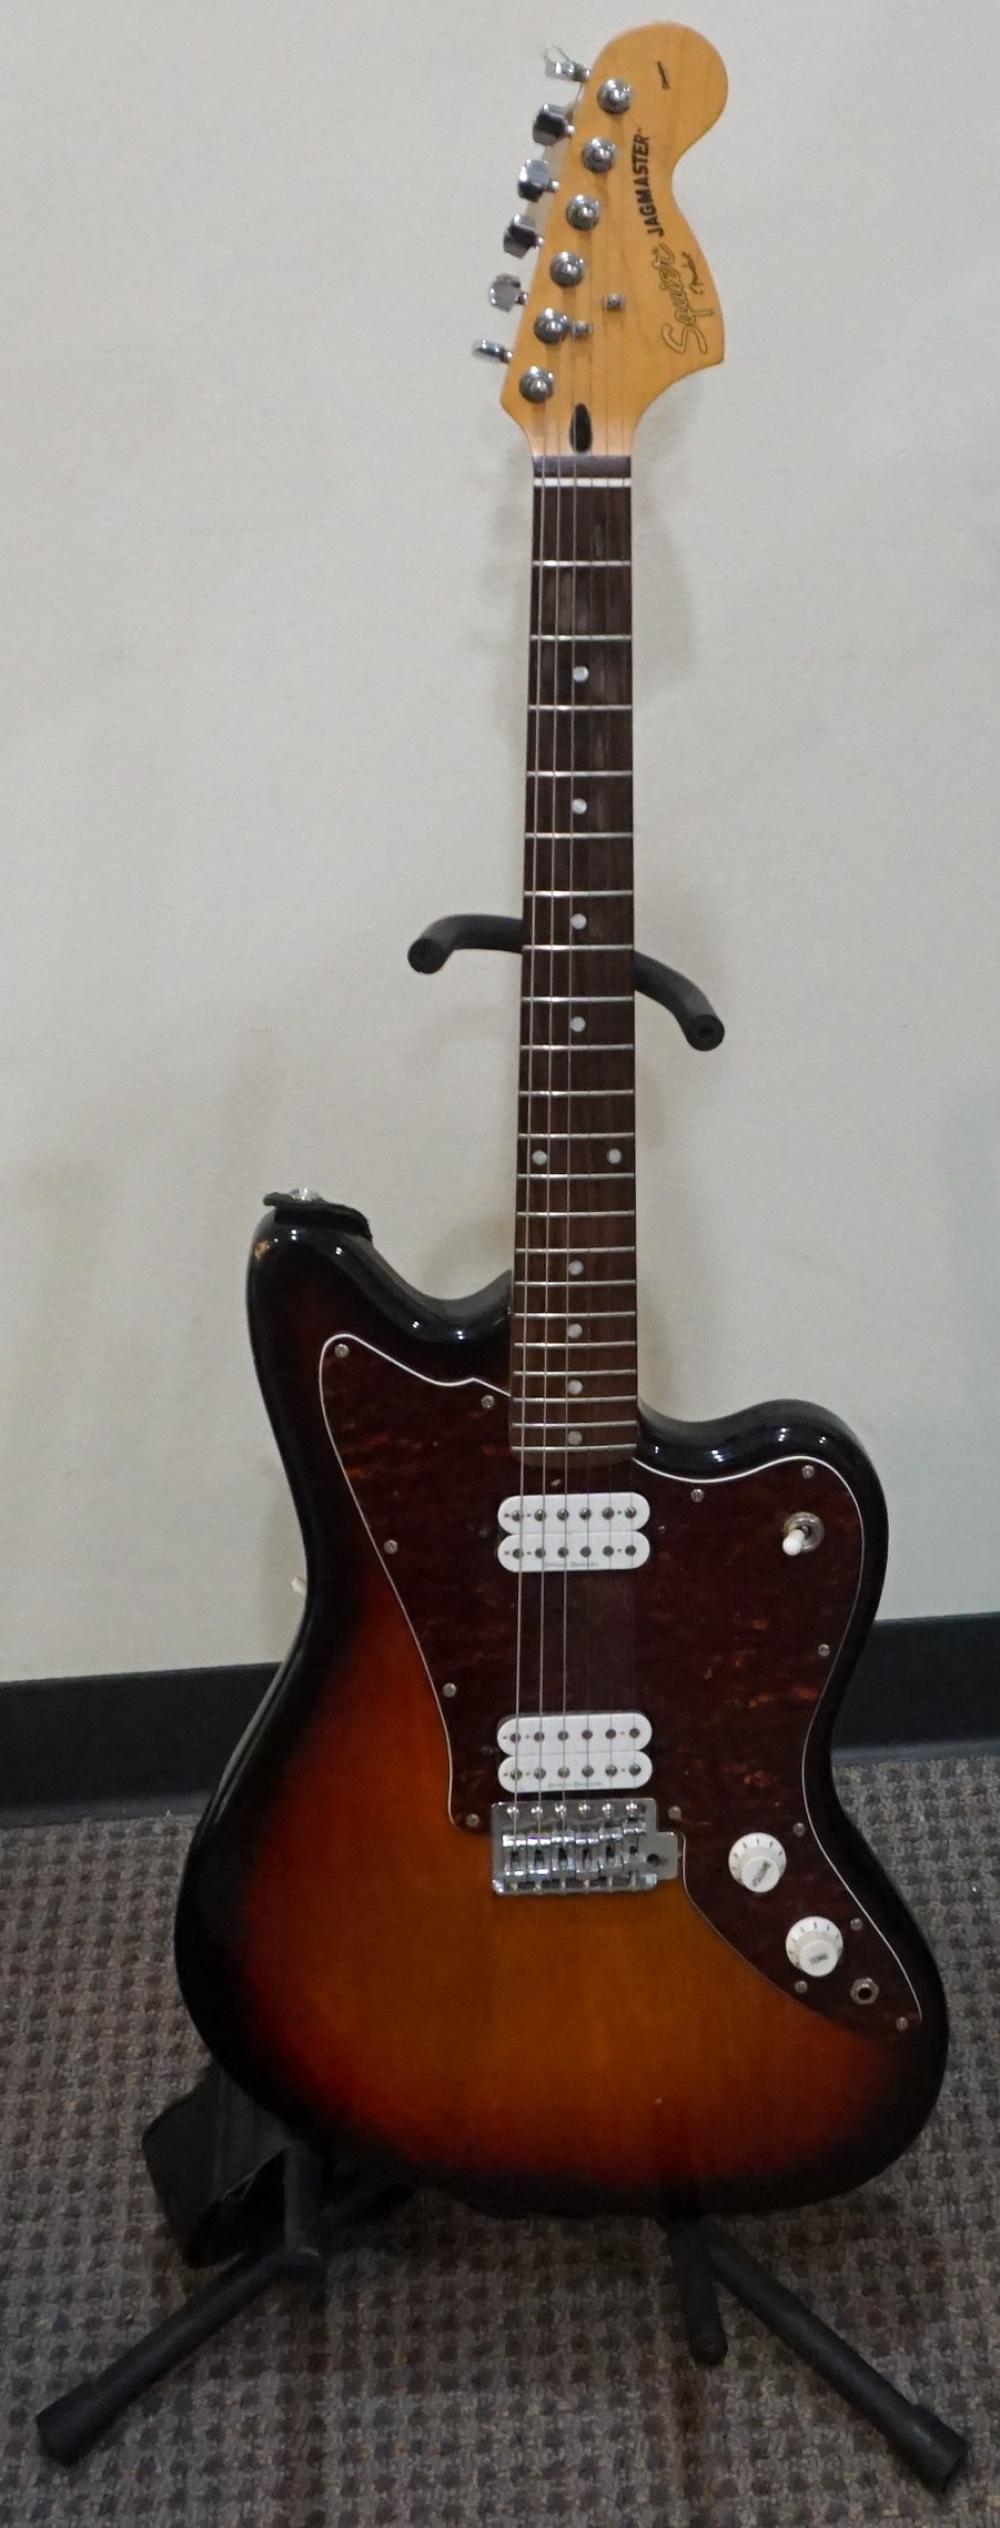 SQUIER FOR FENDER JAGMASTER ELECTRIC